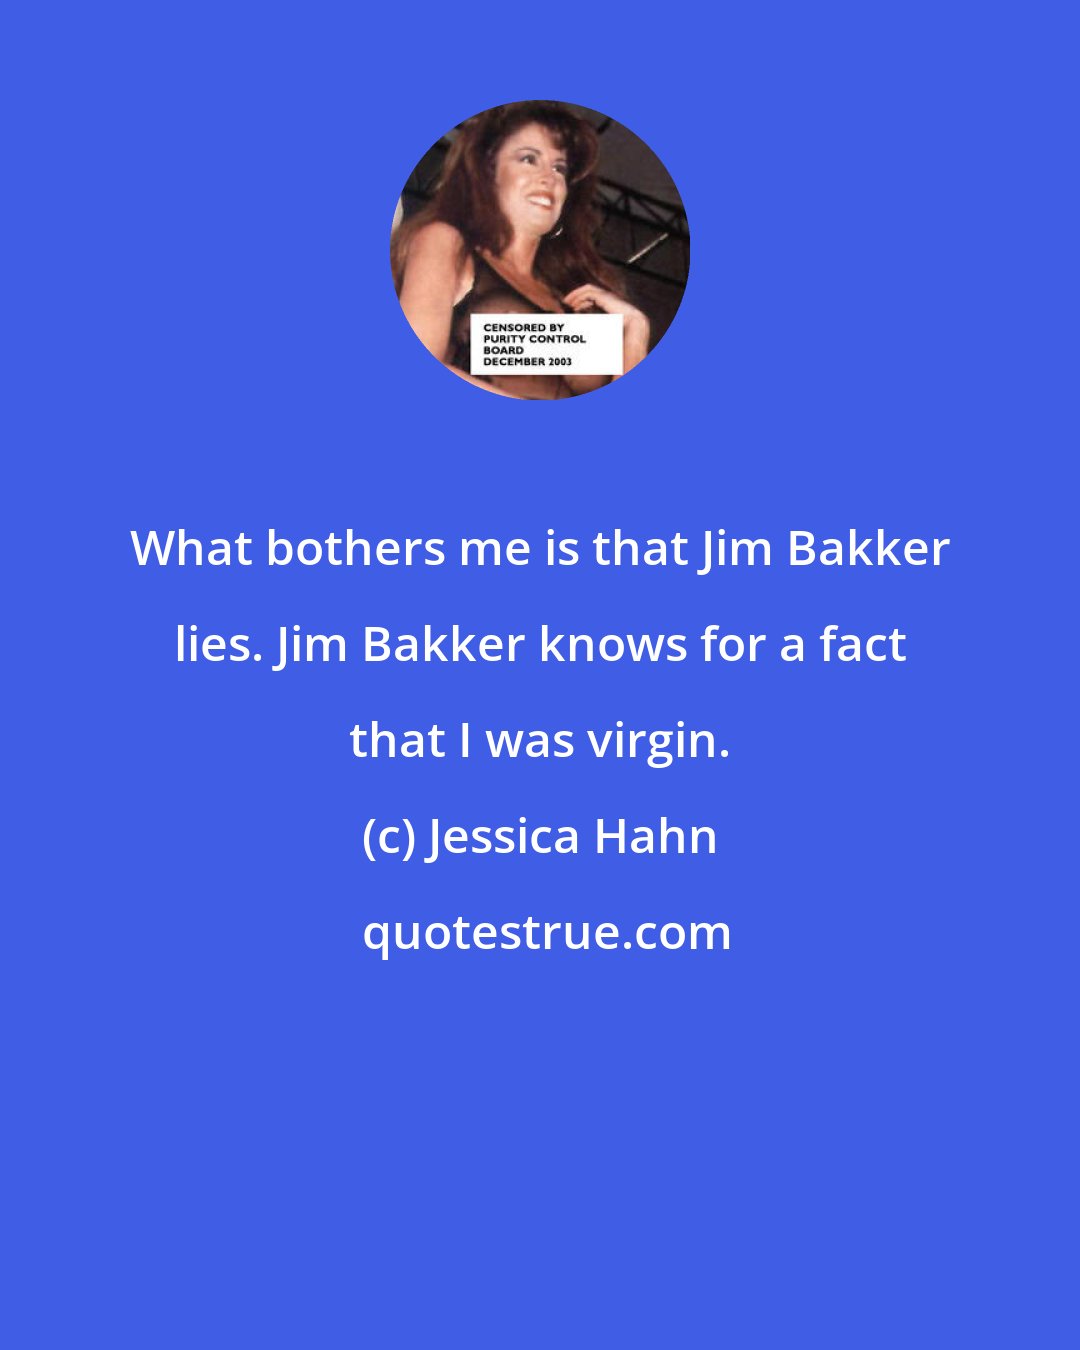 Jessica Hahn: What bothers me is that Jim Bakker lies. Jim Bakker knows for a fact that I was virgin.